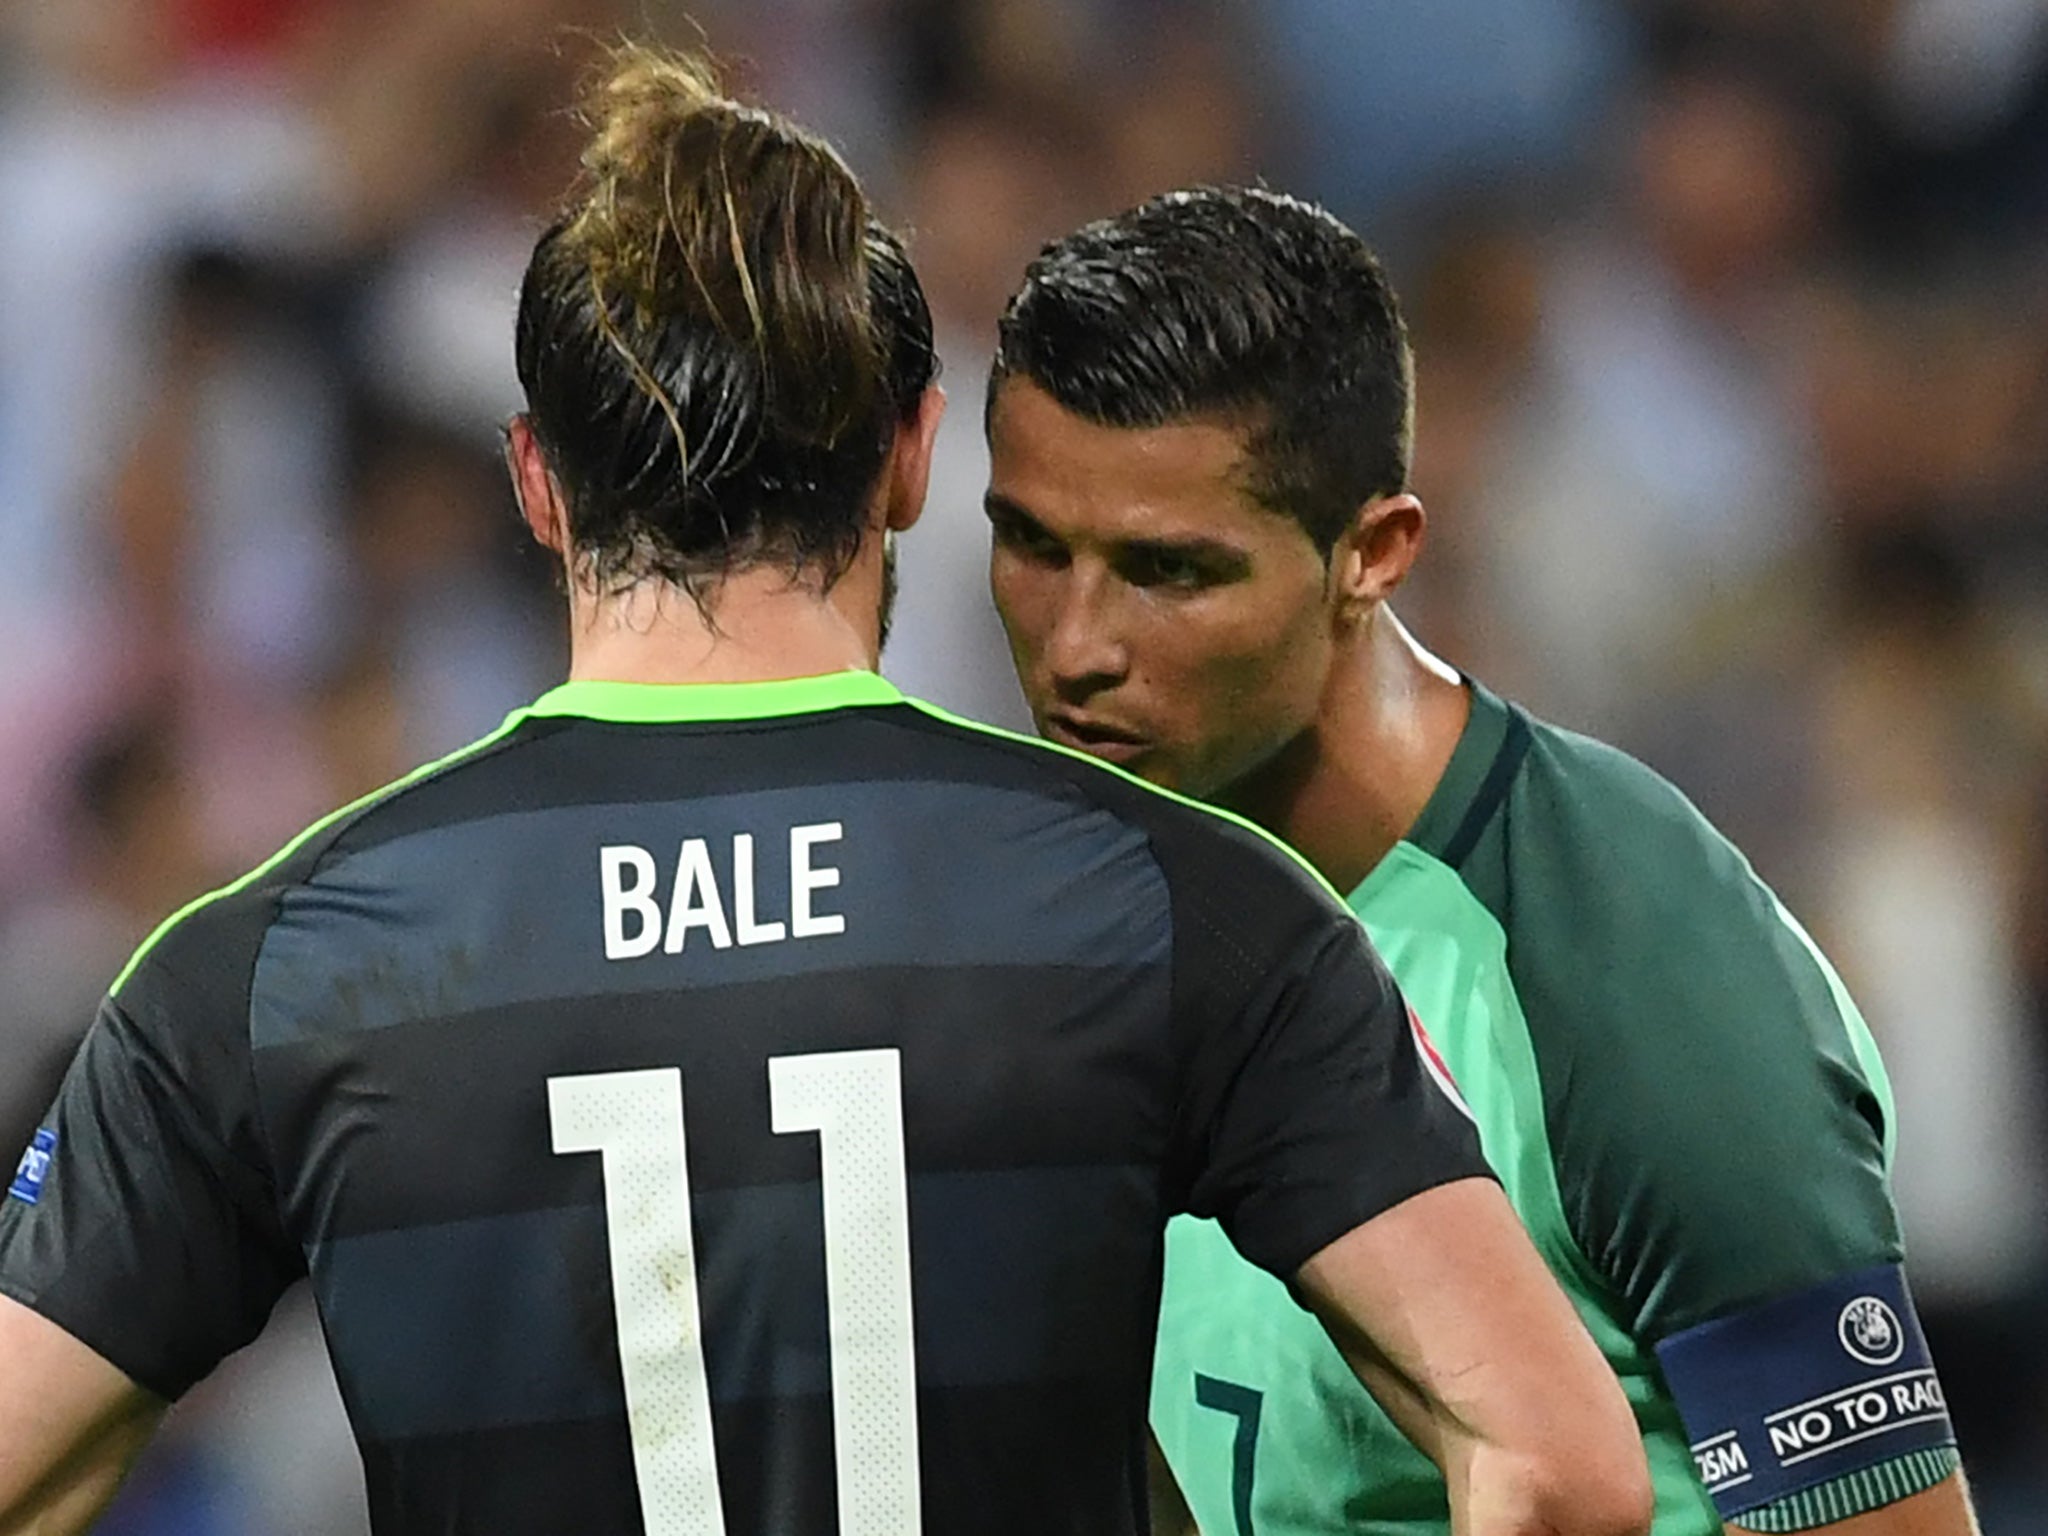 Ronaldo and Bale shared a quiet word after the final whistle